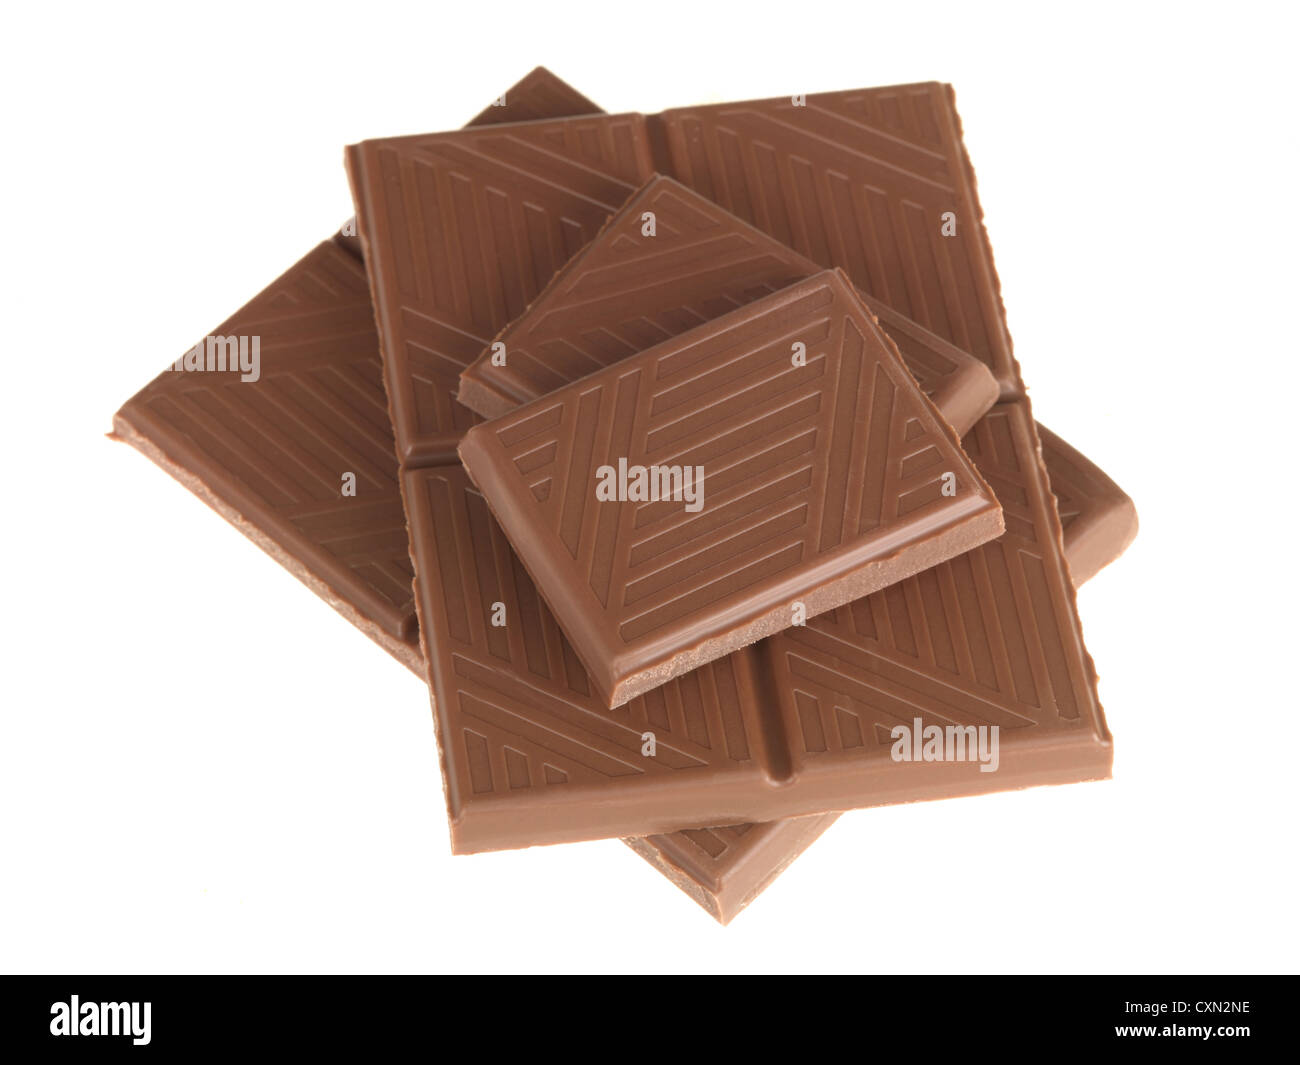 Bar of Delicious Luxury Milk Chocolate Isolated Against a White Background With No People And Copy Space Stock Photo